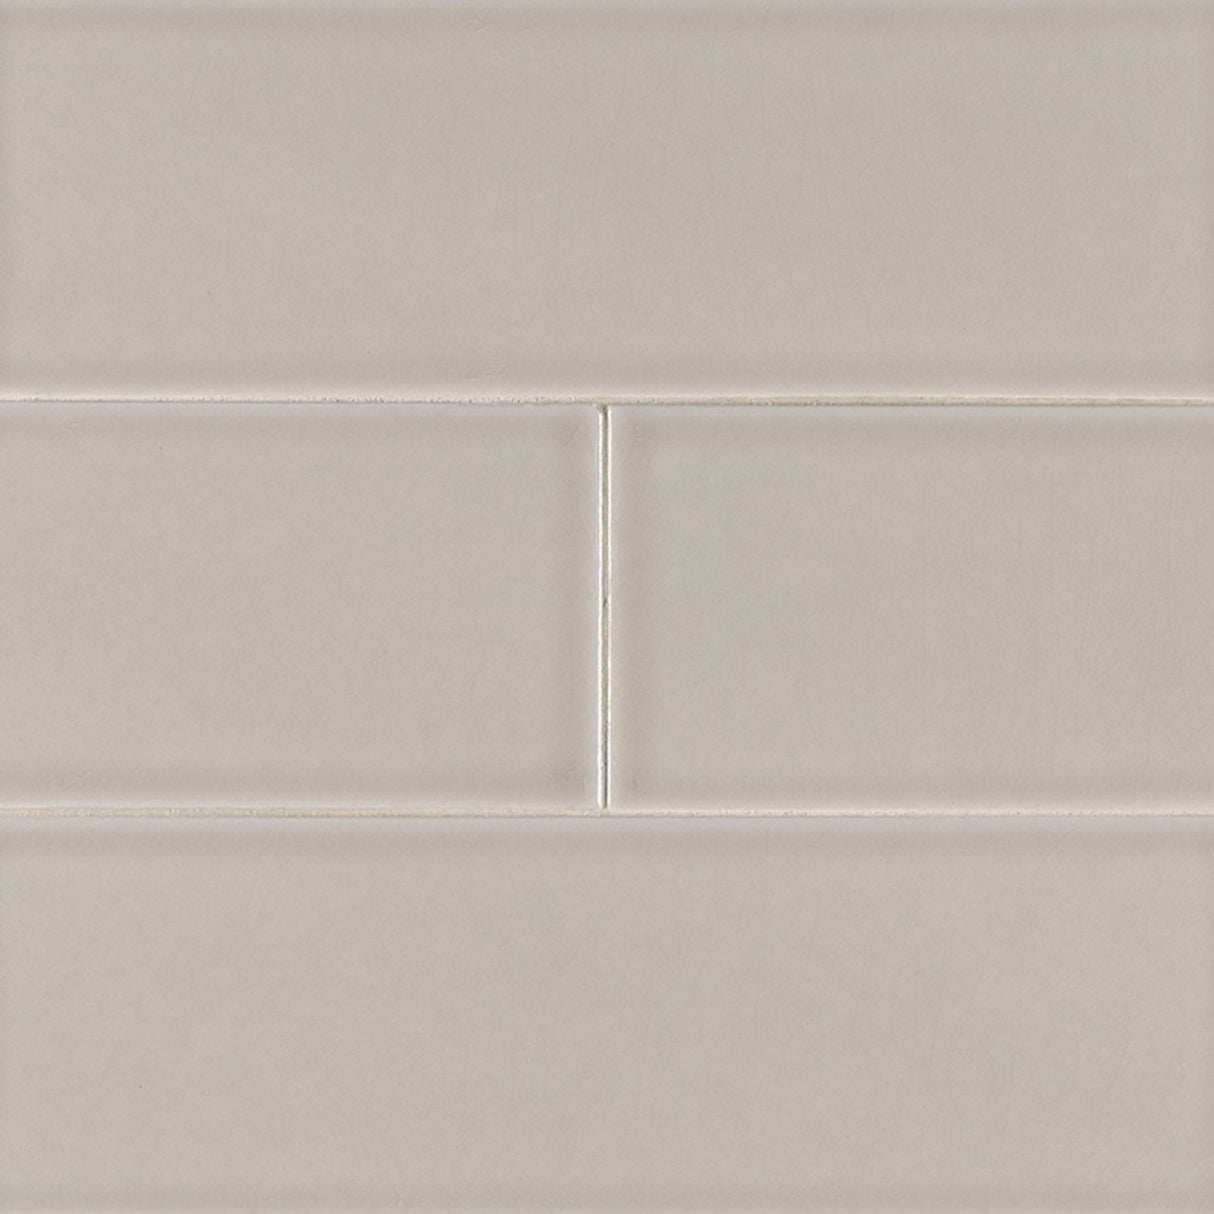 Portico-pearl-handcrafted-4x12-glossy-ceramic-wall-tile-SMOT-PT-PORPEA412-product-shot-angle-view